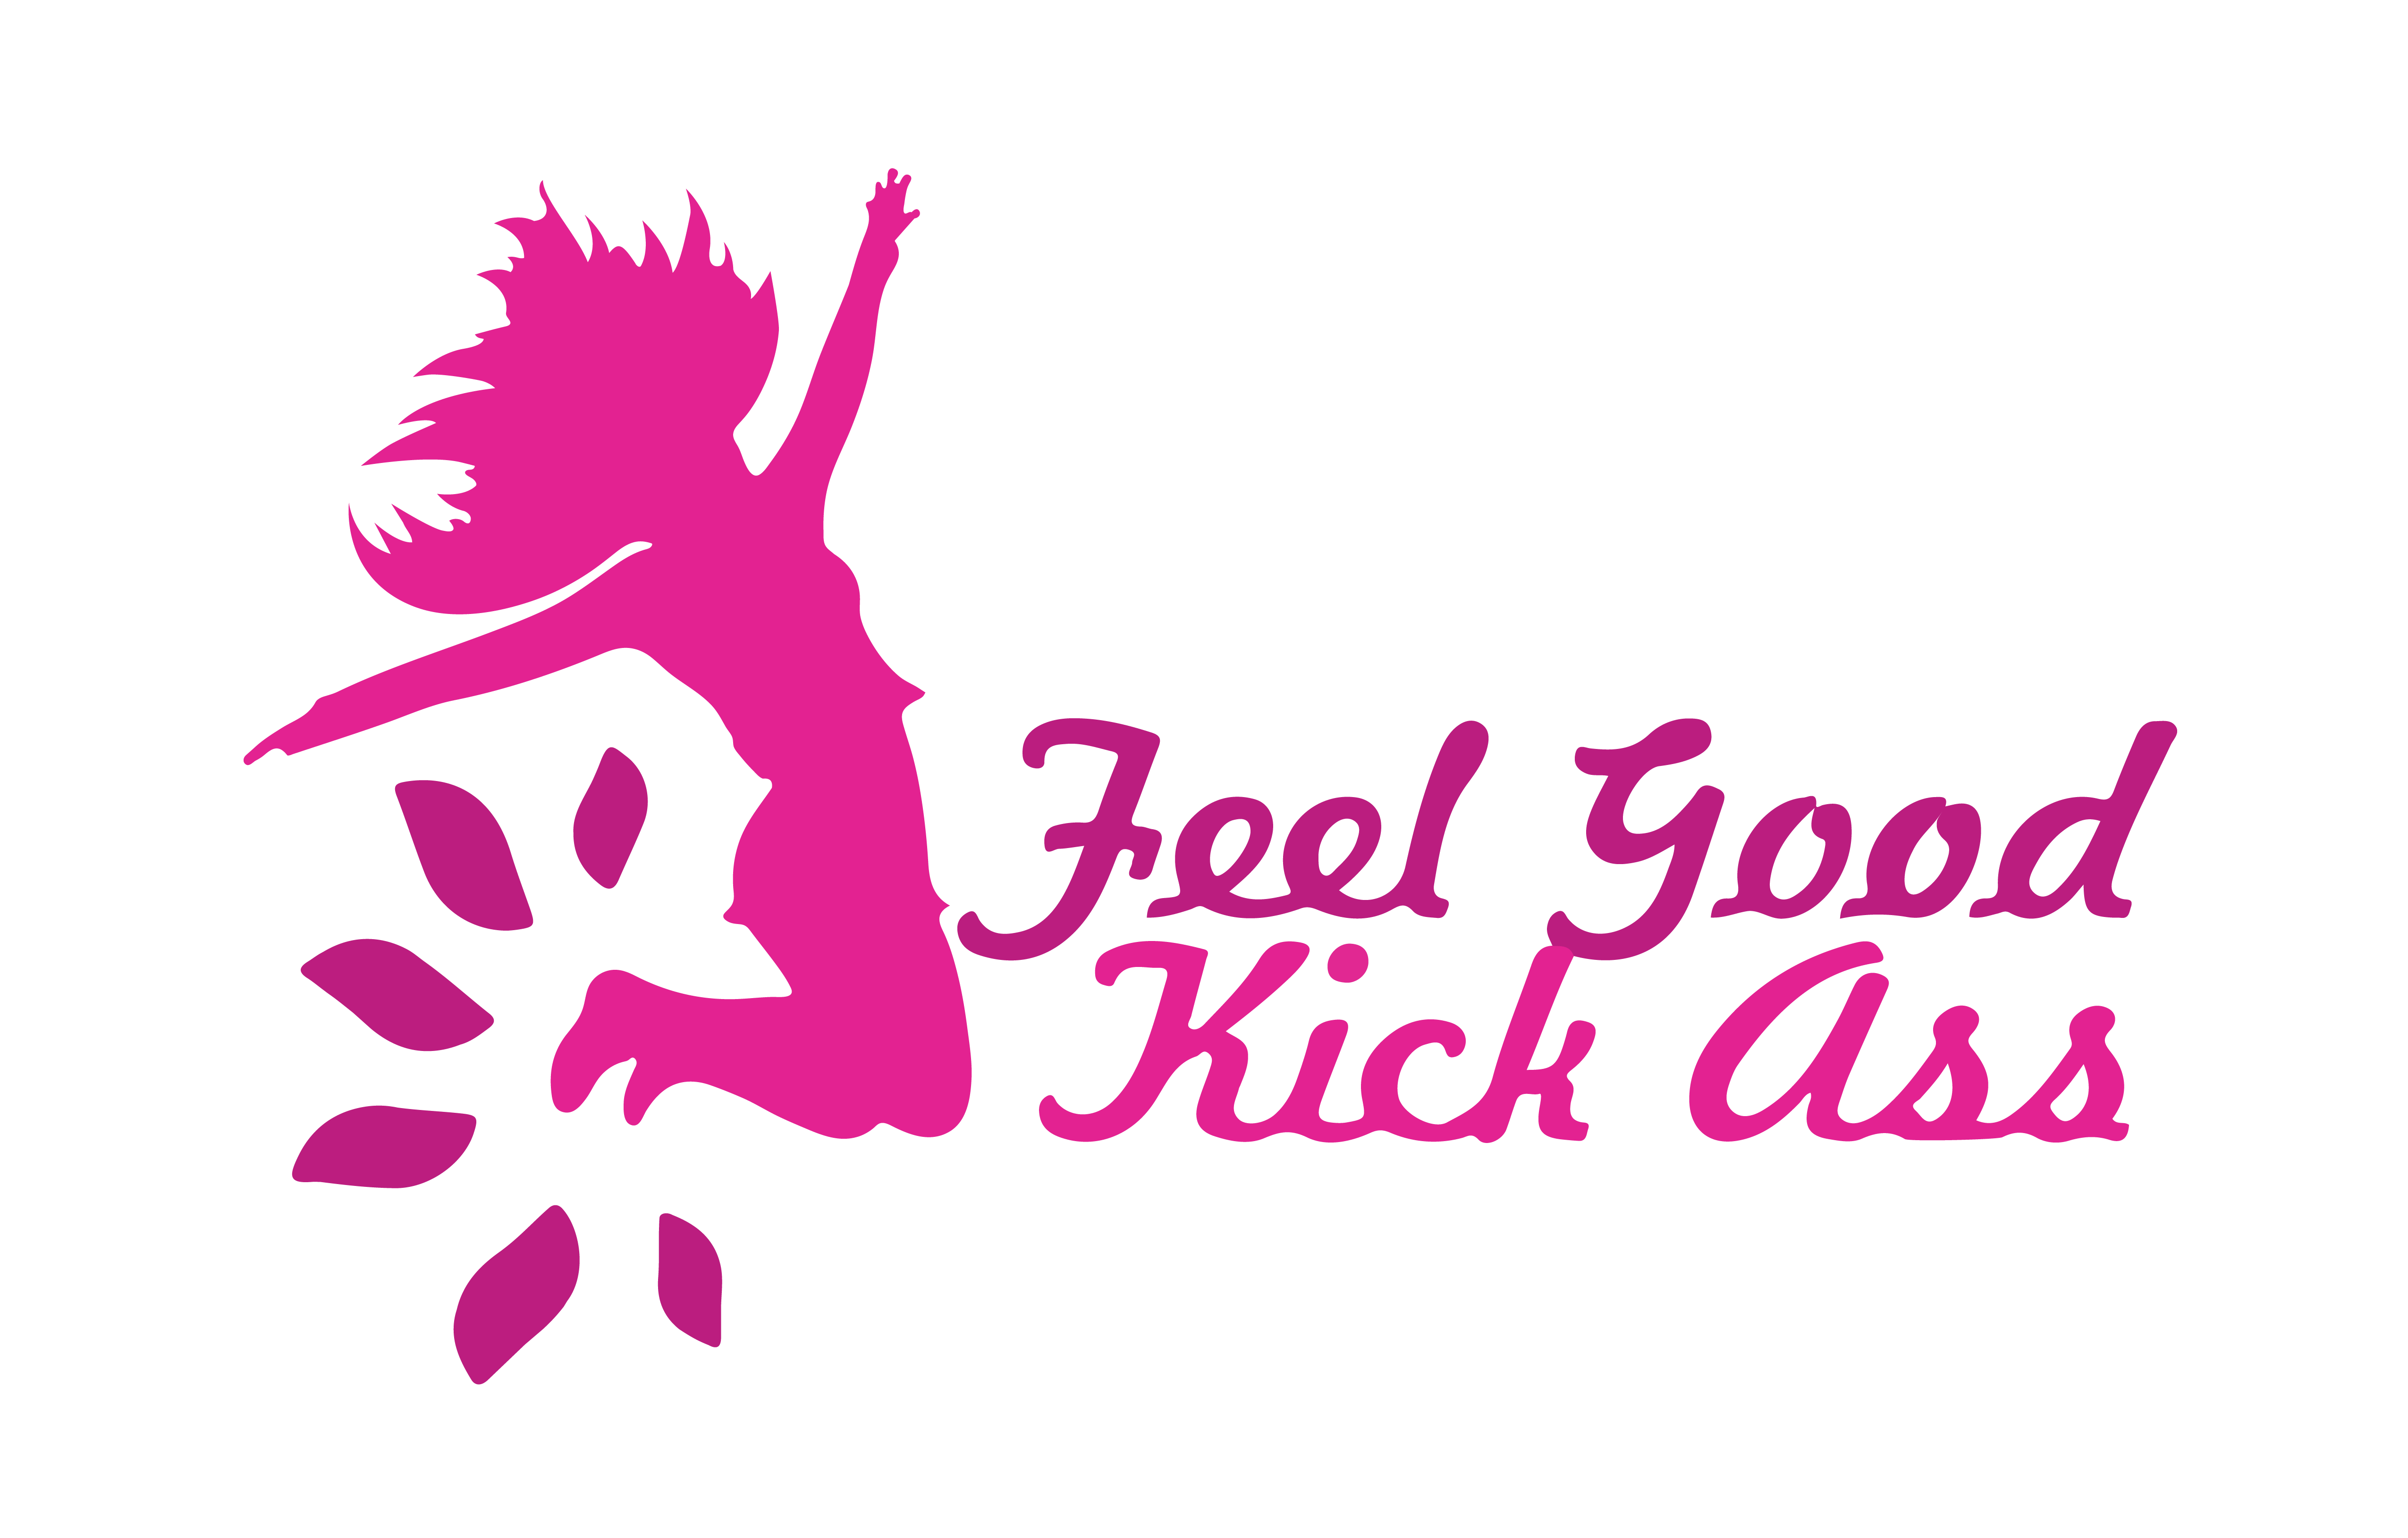 logo of woman jumping in the air on the left with the words FEEL GOOD KICK ASS on the right